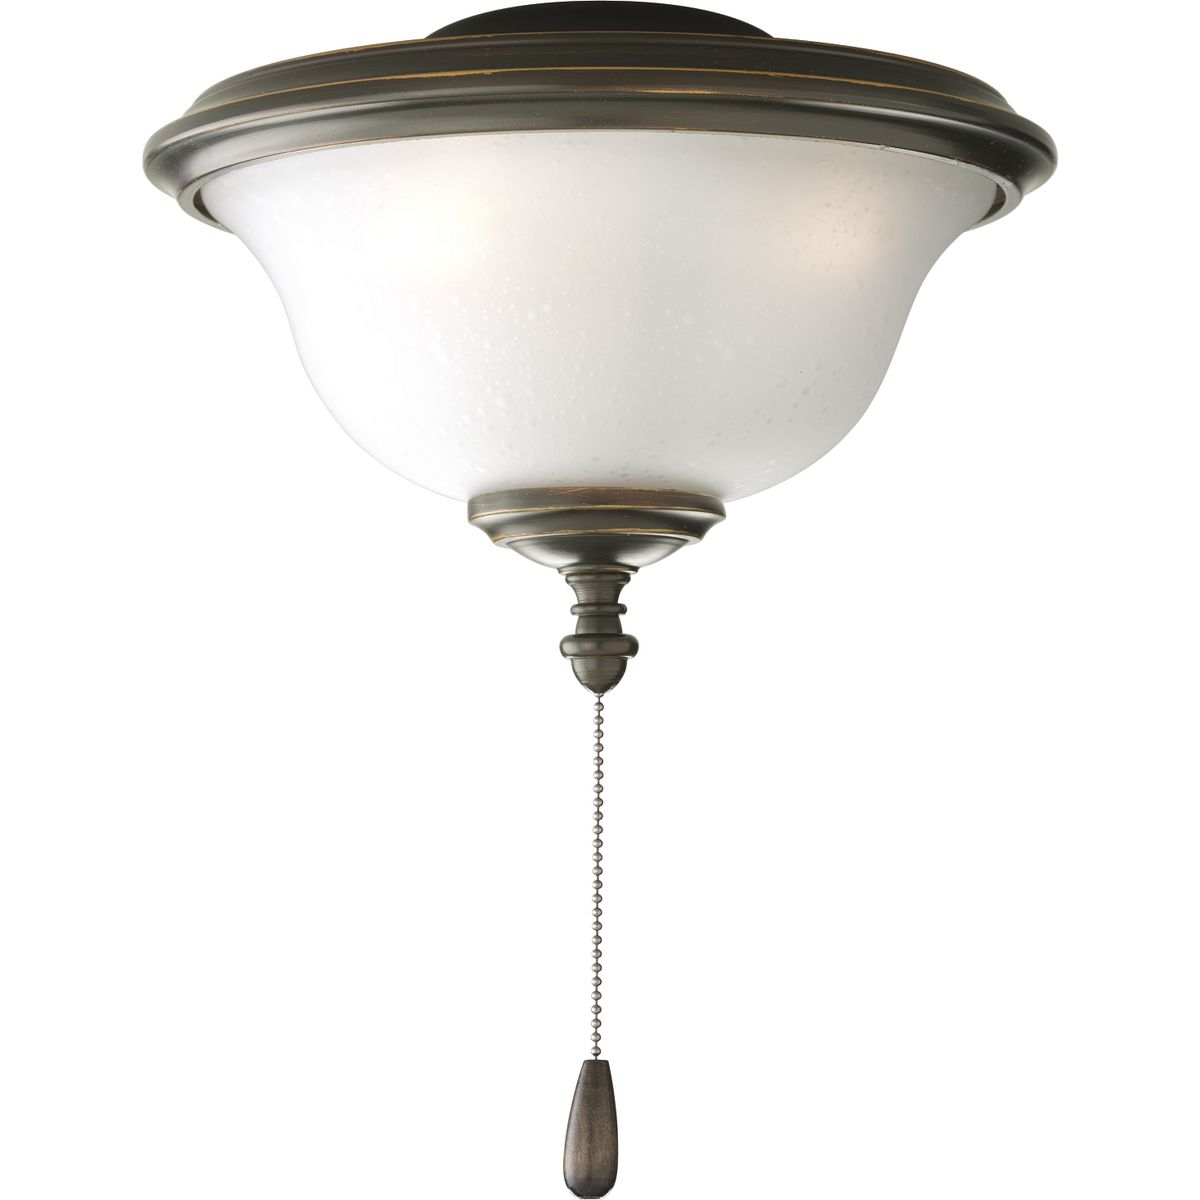 Two-light Indoor/Outdoor fan light kit with universal style. Classic old world styling, the Ashmore Collection features a seeded water glass diffuser to reduce glare and to minimize cleaning requirements. Antique Bronze finish corresponds with an Antique Brass pull chain and walnut fob. Quick connect wiring available with fans that accept an accessory light. Includes two 3000K, 800 lumen each (source), Title 24 certified LED bulbs.